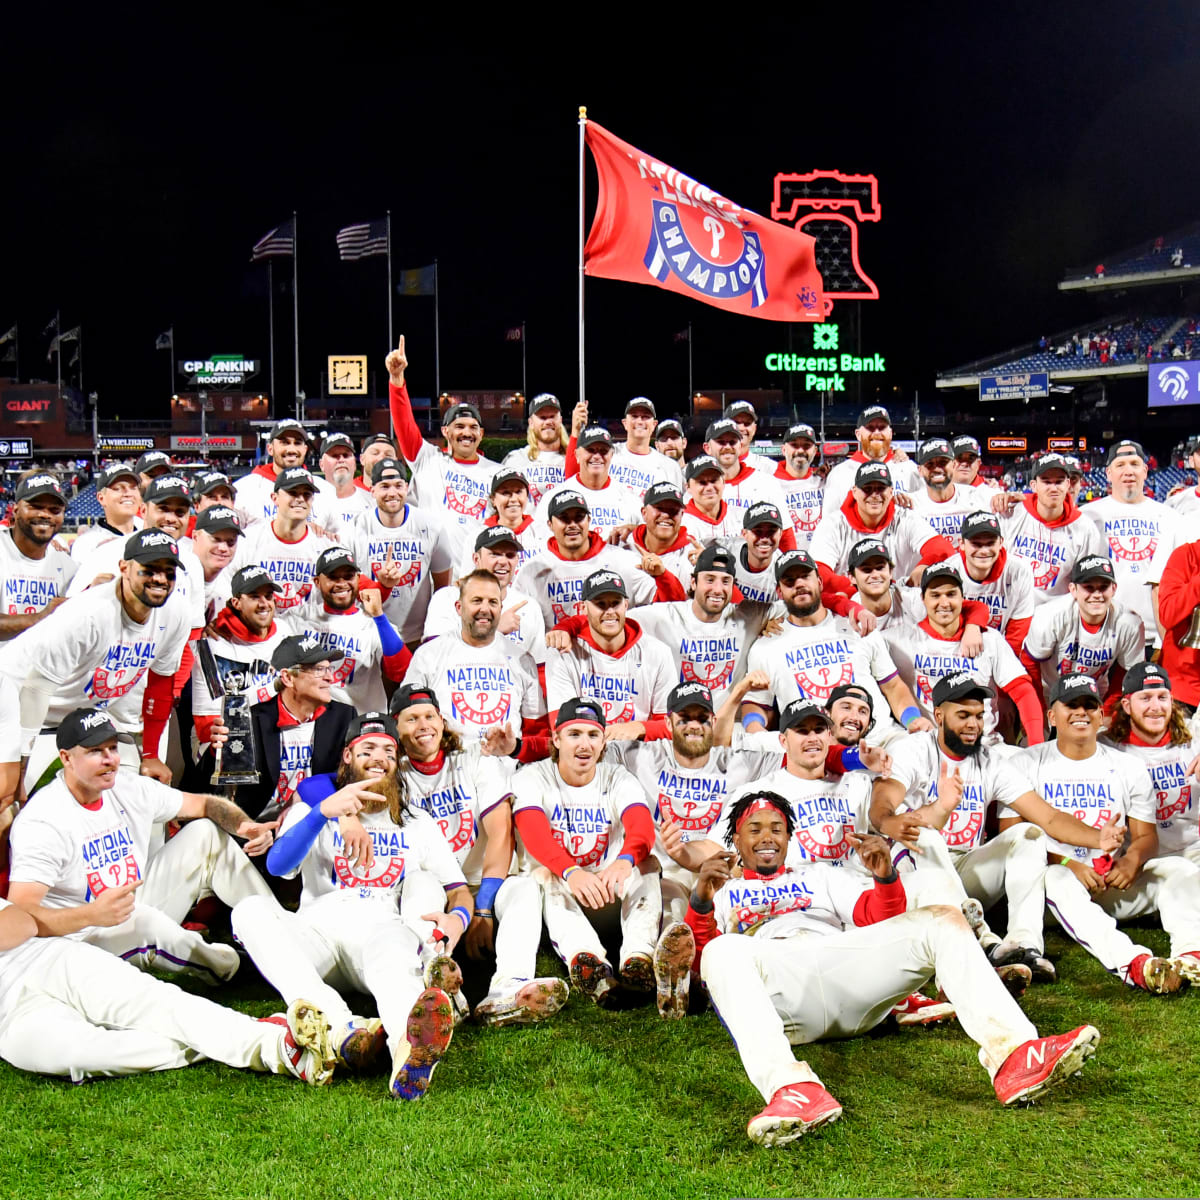 Where were you when the Phillies won the World Series 10 years ago today?  We asked, and you told us.